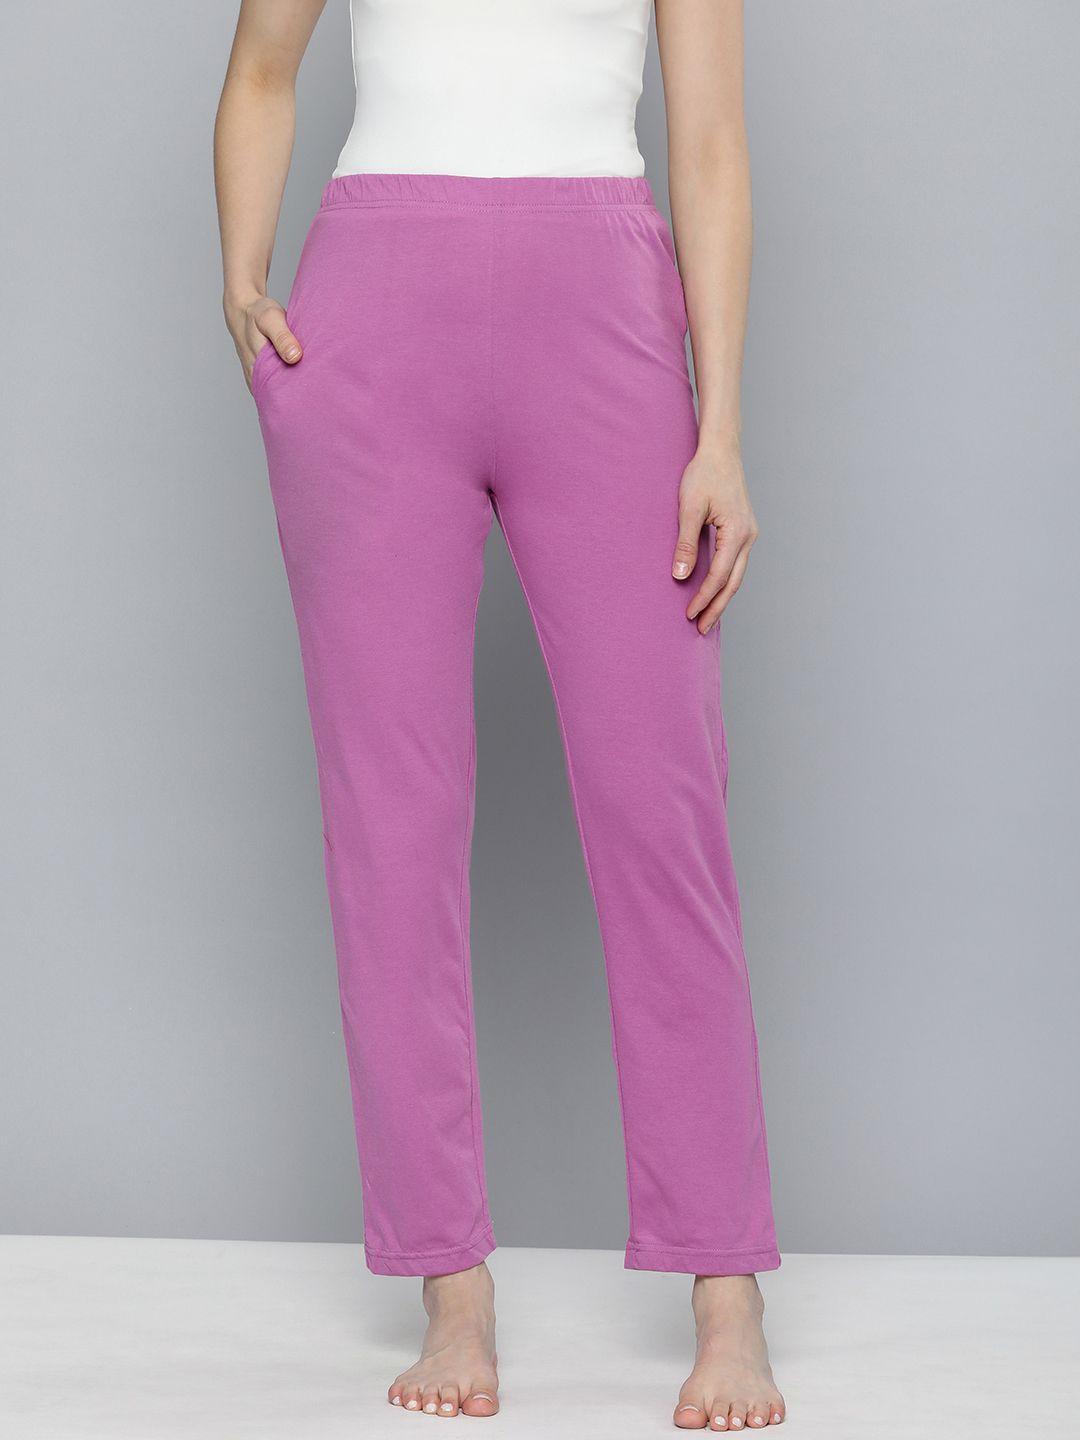 here&now-women-pure-cotton-solid-mid-rise-lounge-pants